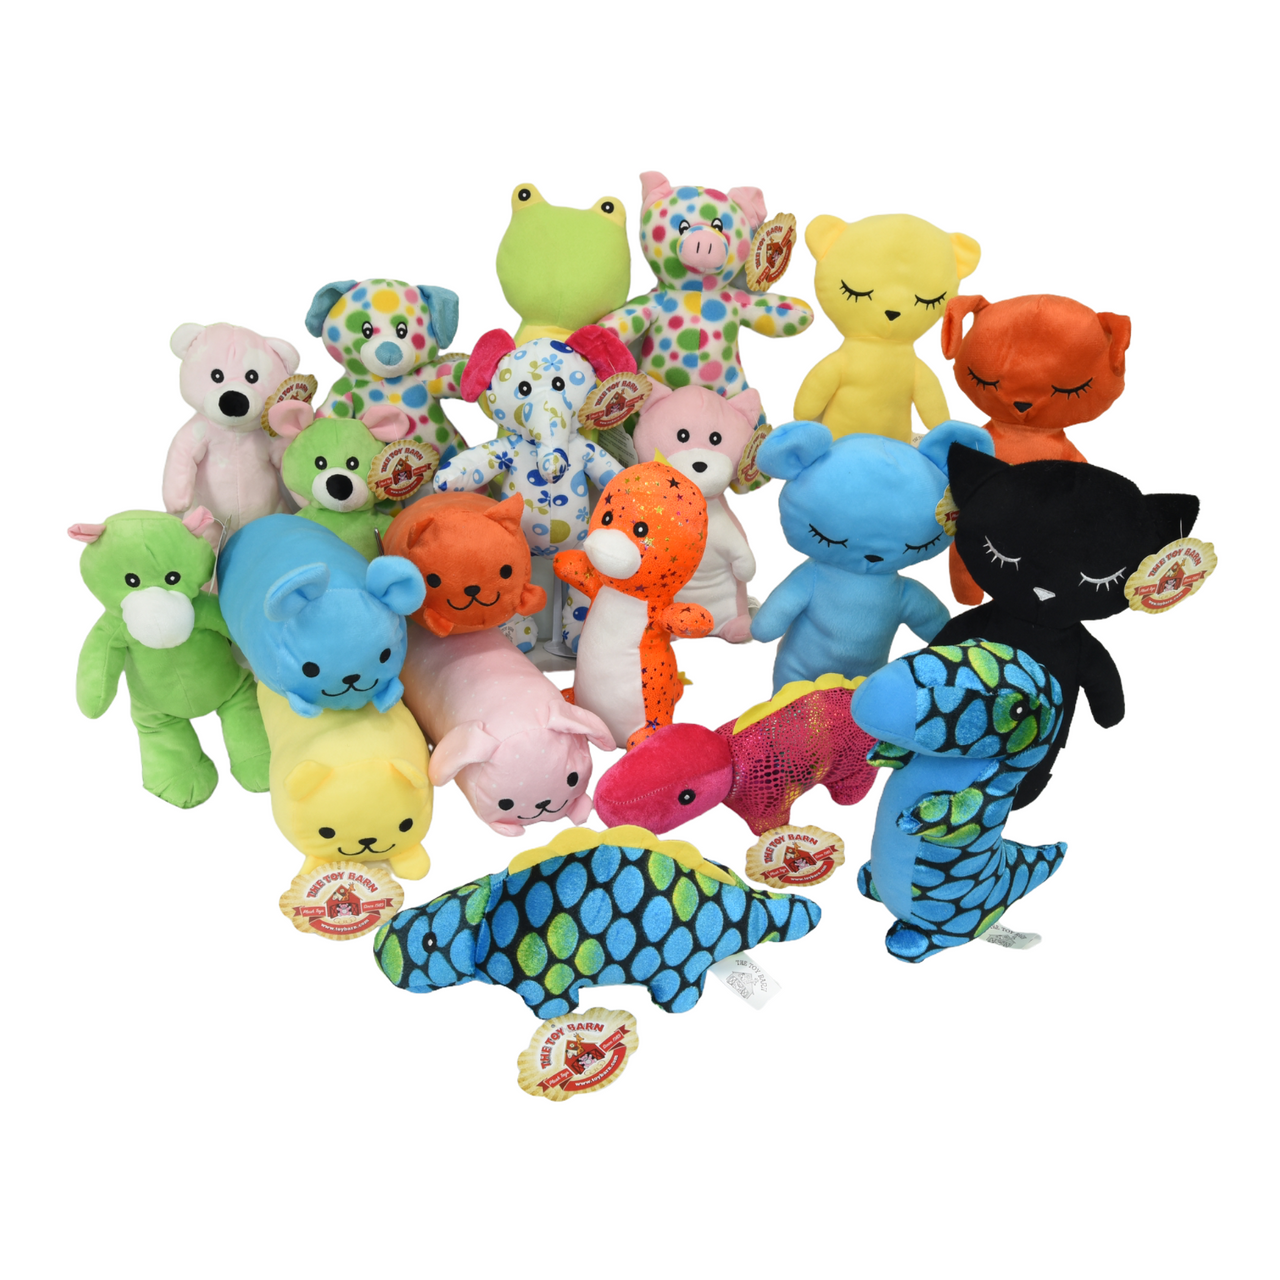 https://cdn11.bigcommerce.com/s-mhr53lwccw/images/stencil/1280x1280/products/1303/8503/toy-barn-stuffed-animal-plush-toy-assortment-12-inch-main__30363.1666898162.png?c=1?imbypass=on